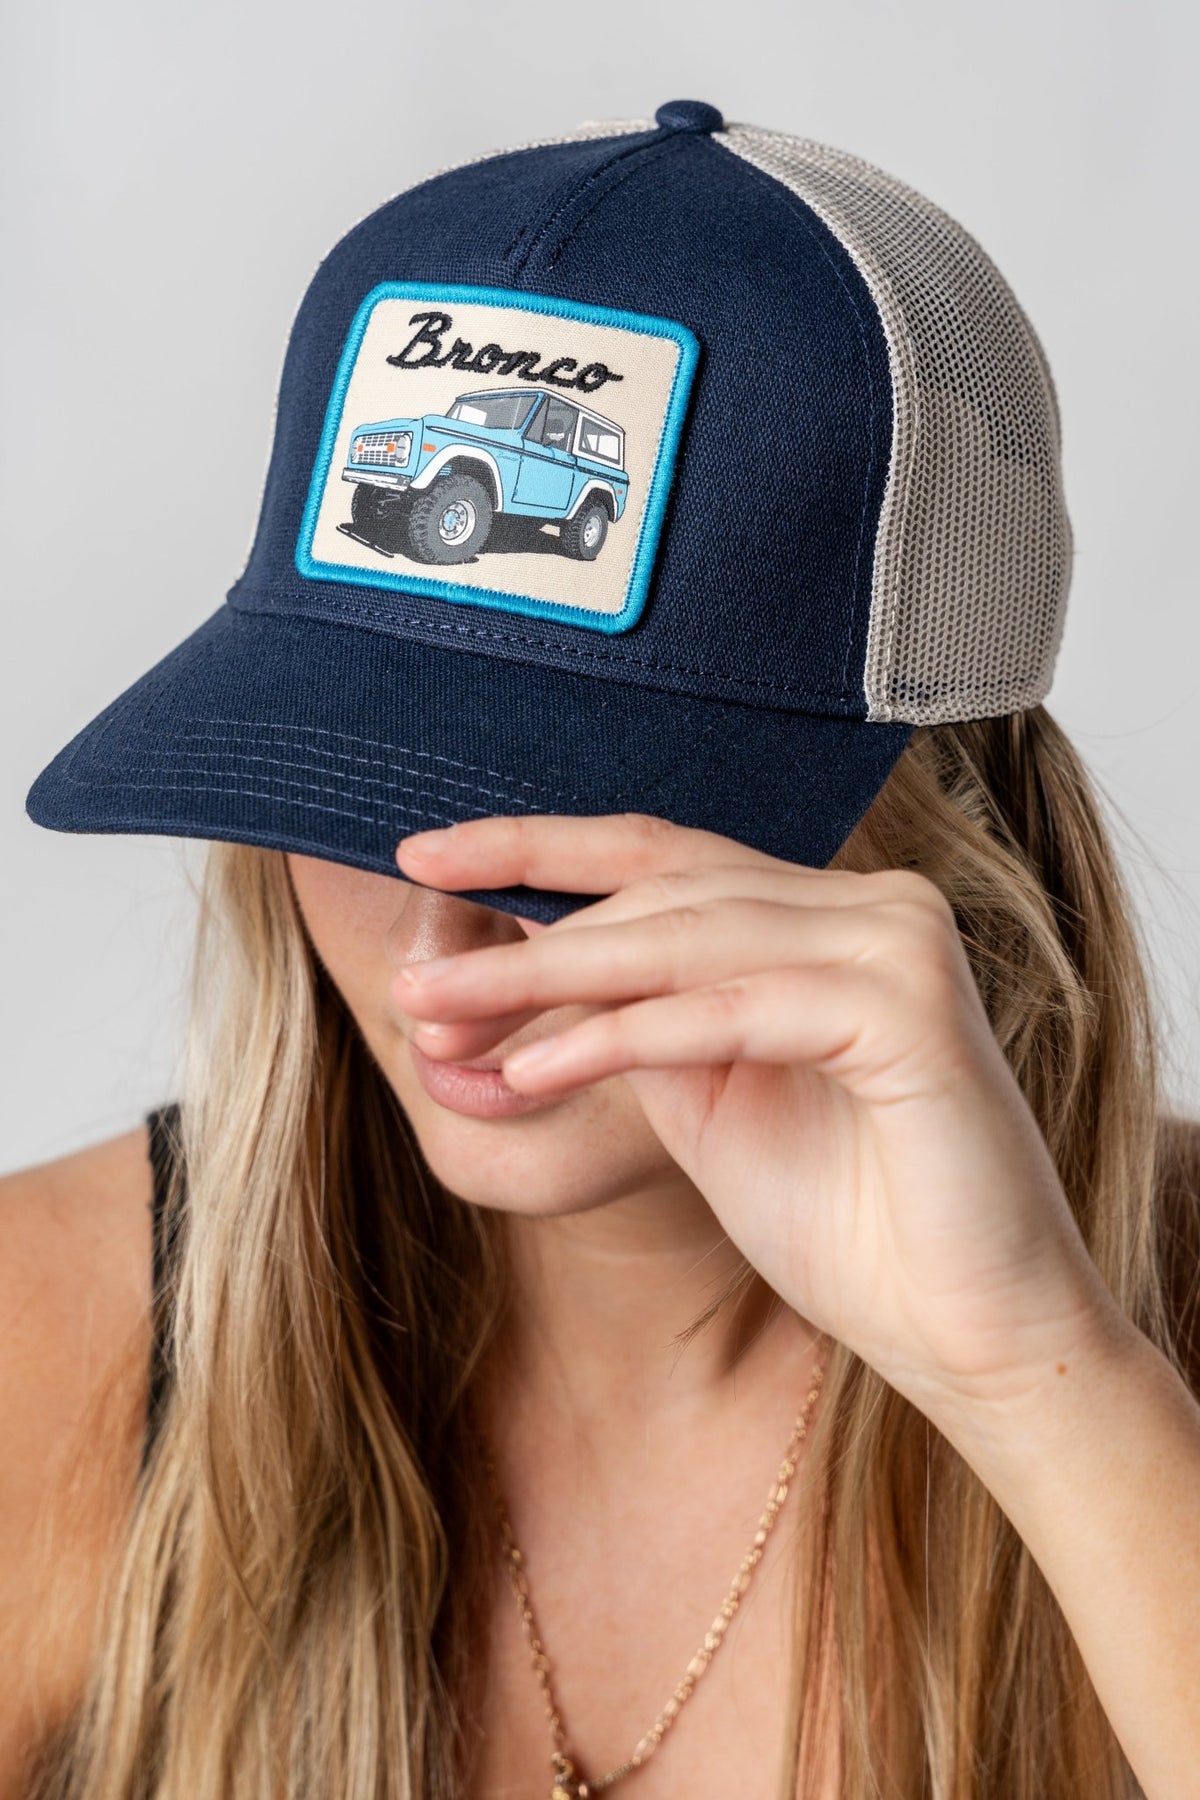 Bronco valin hat Invy - Trendy Gifts at Lush Fashion Lounge Boutique in Oklahoma City